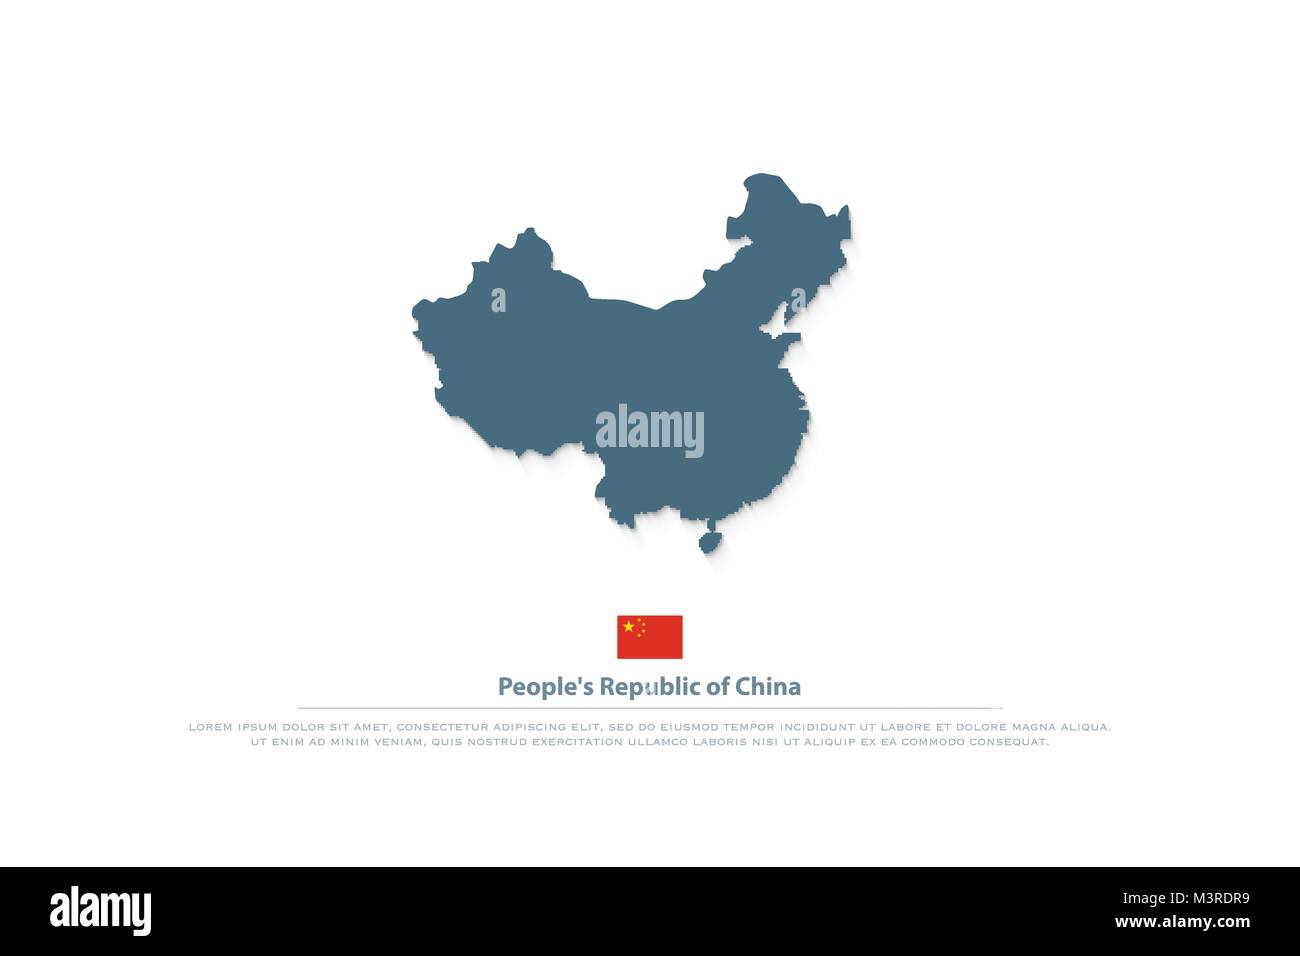 People's Republic of China isolated map and official flag icons. vector Chinese political map  illustration. Asian country geographic banner design. t Stock Vector